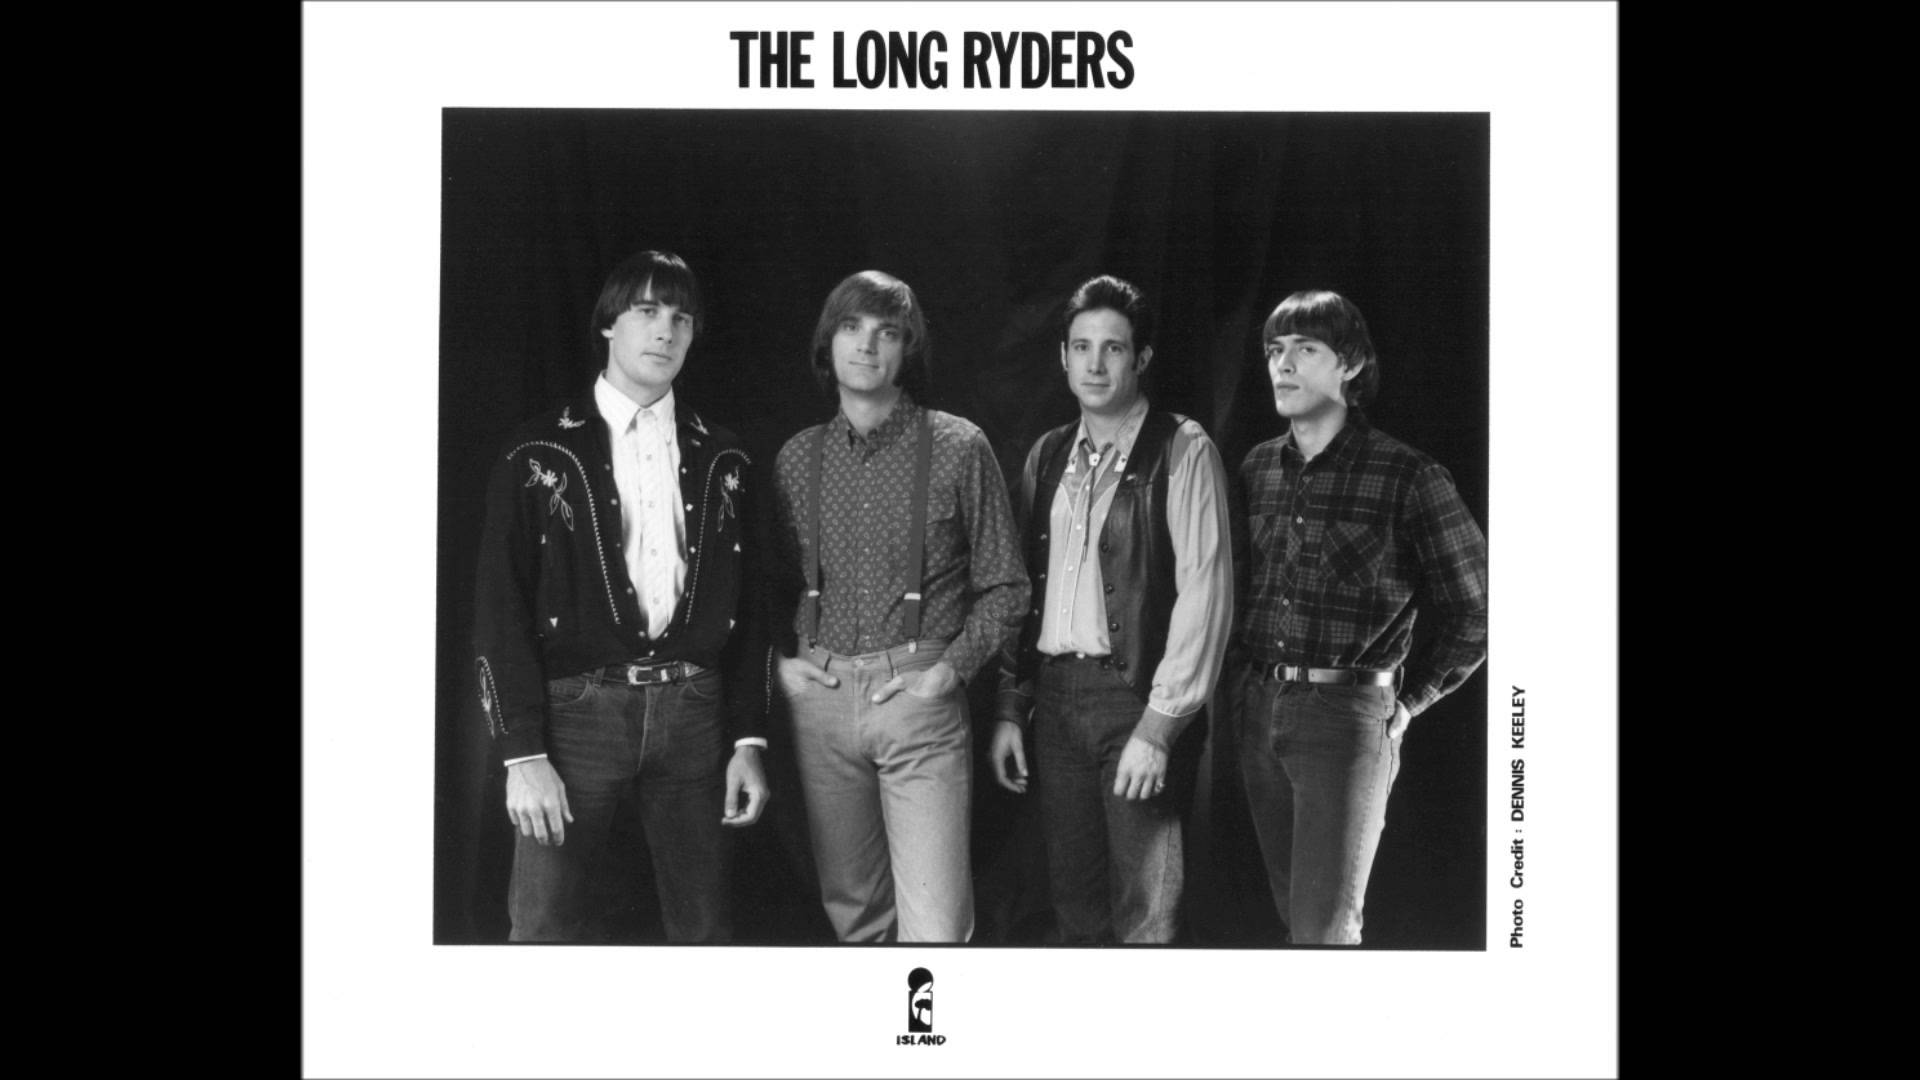 The Witching Hour Sessions – Long Ryders